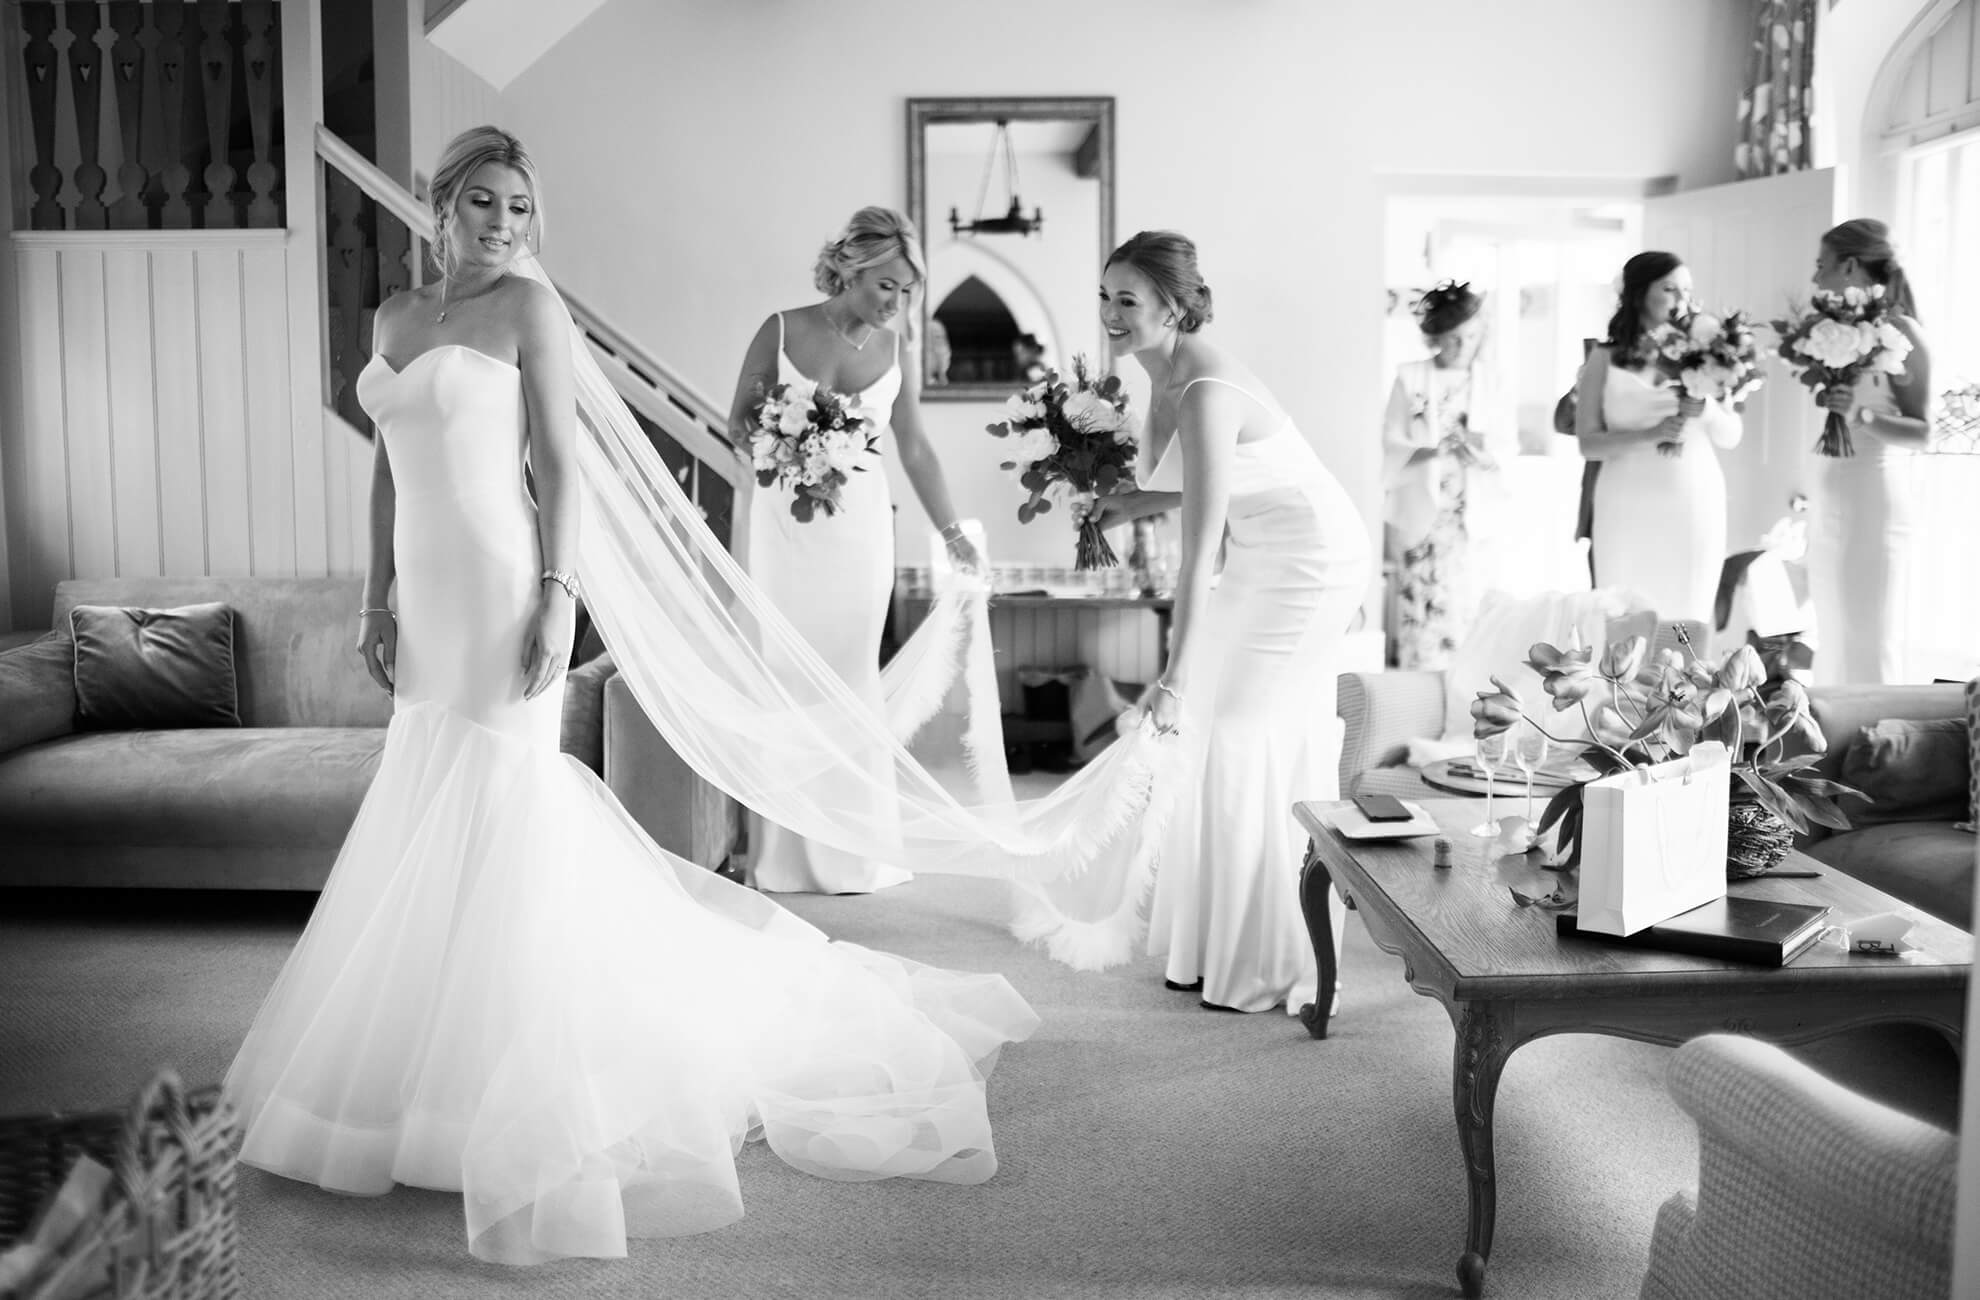 Bridesmaids help the bride with last minute preparations on the morning of her wedding day